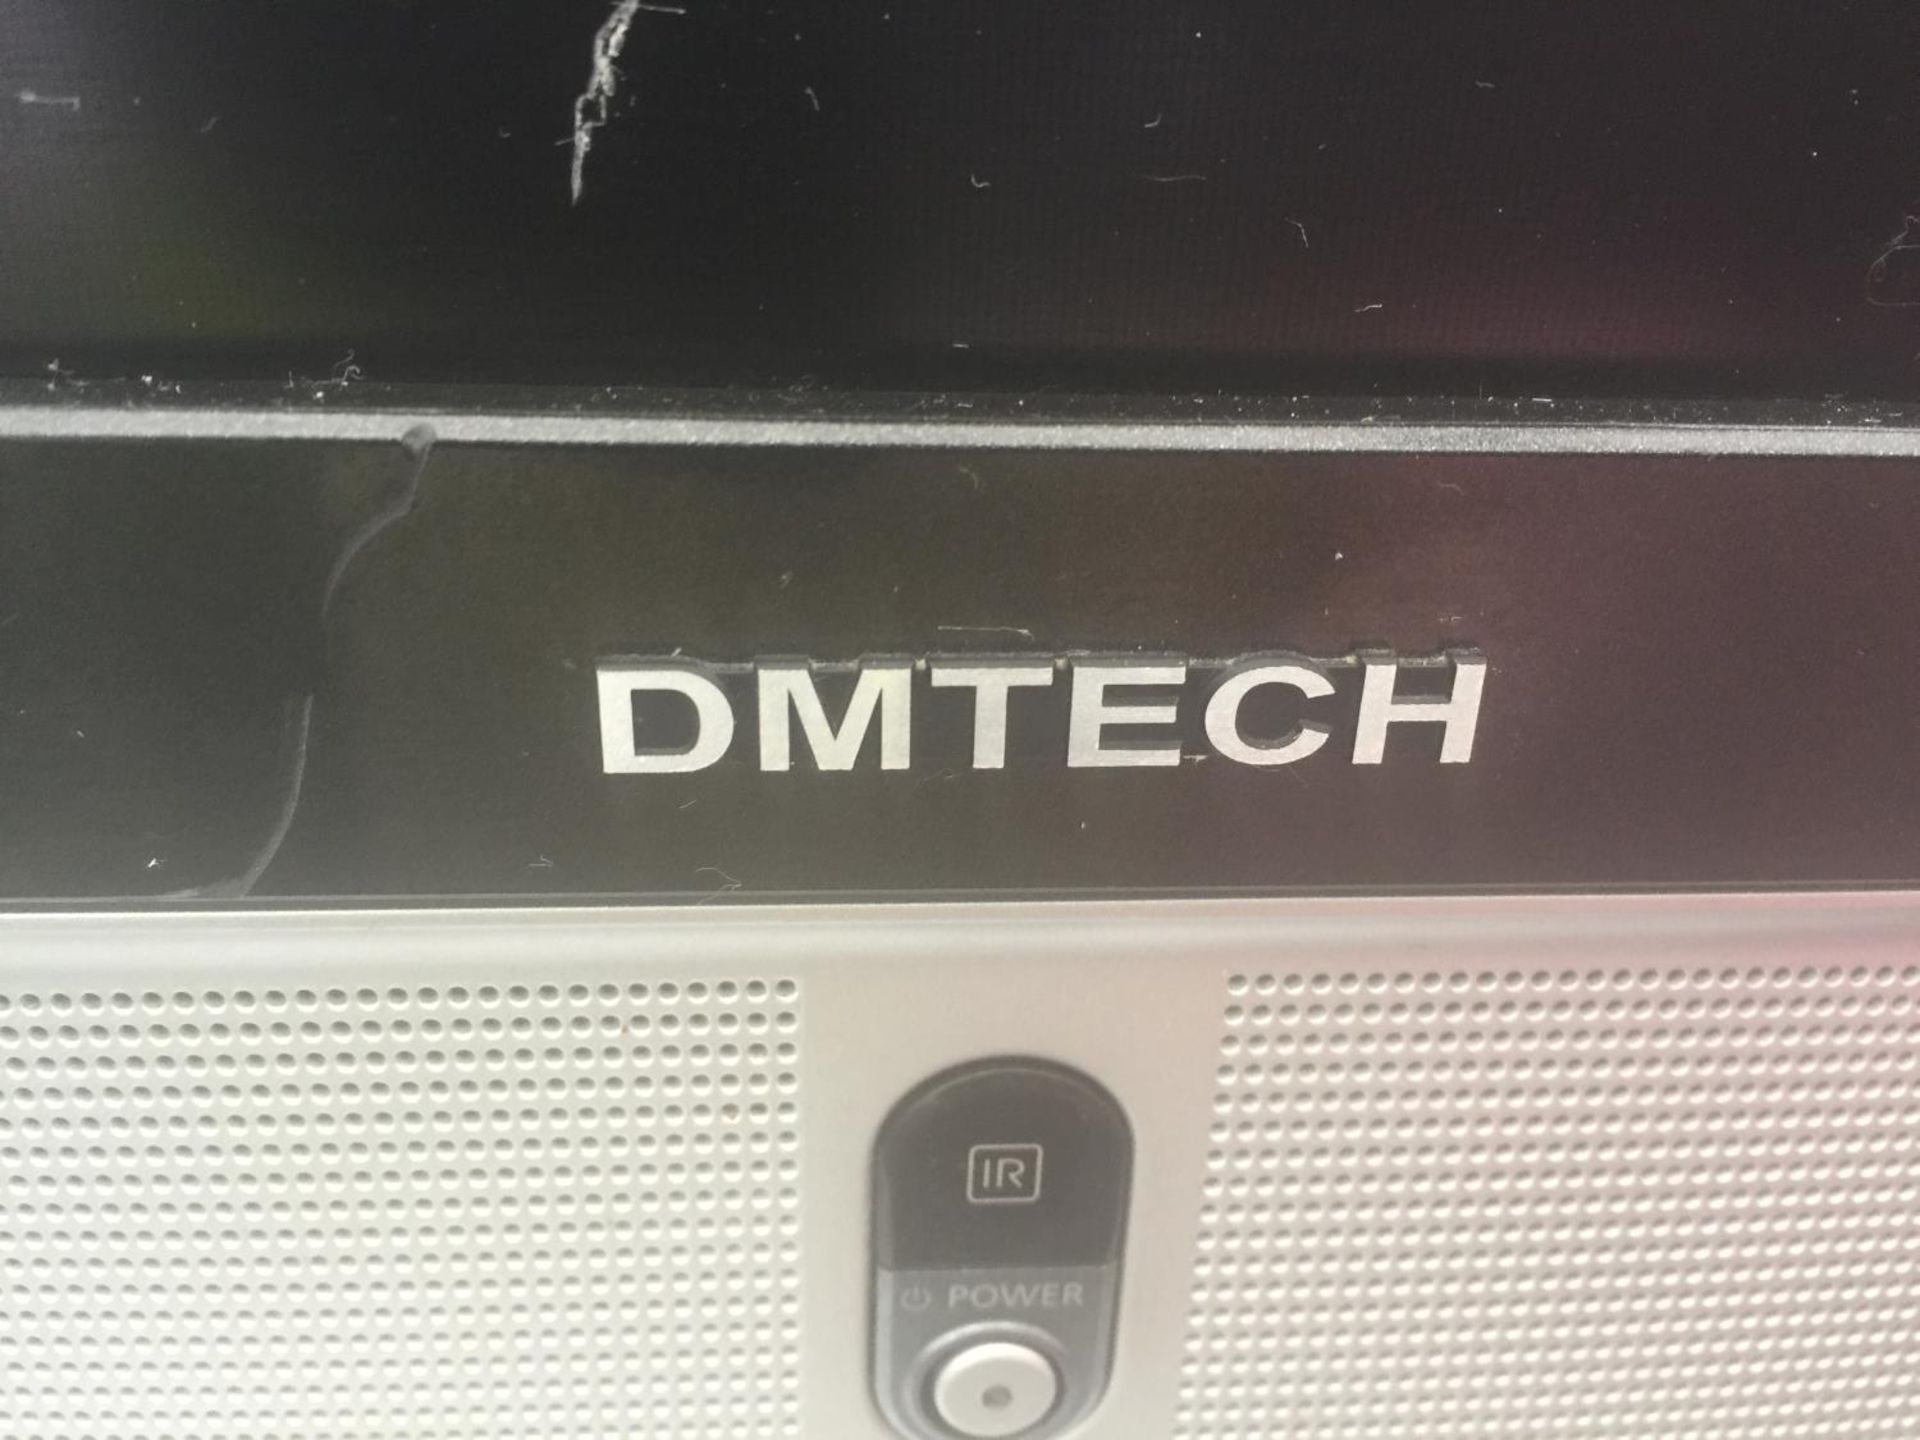 A 20" DMTECH TELEVISION - Image 2 of 3